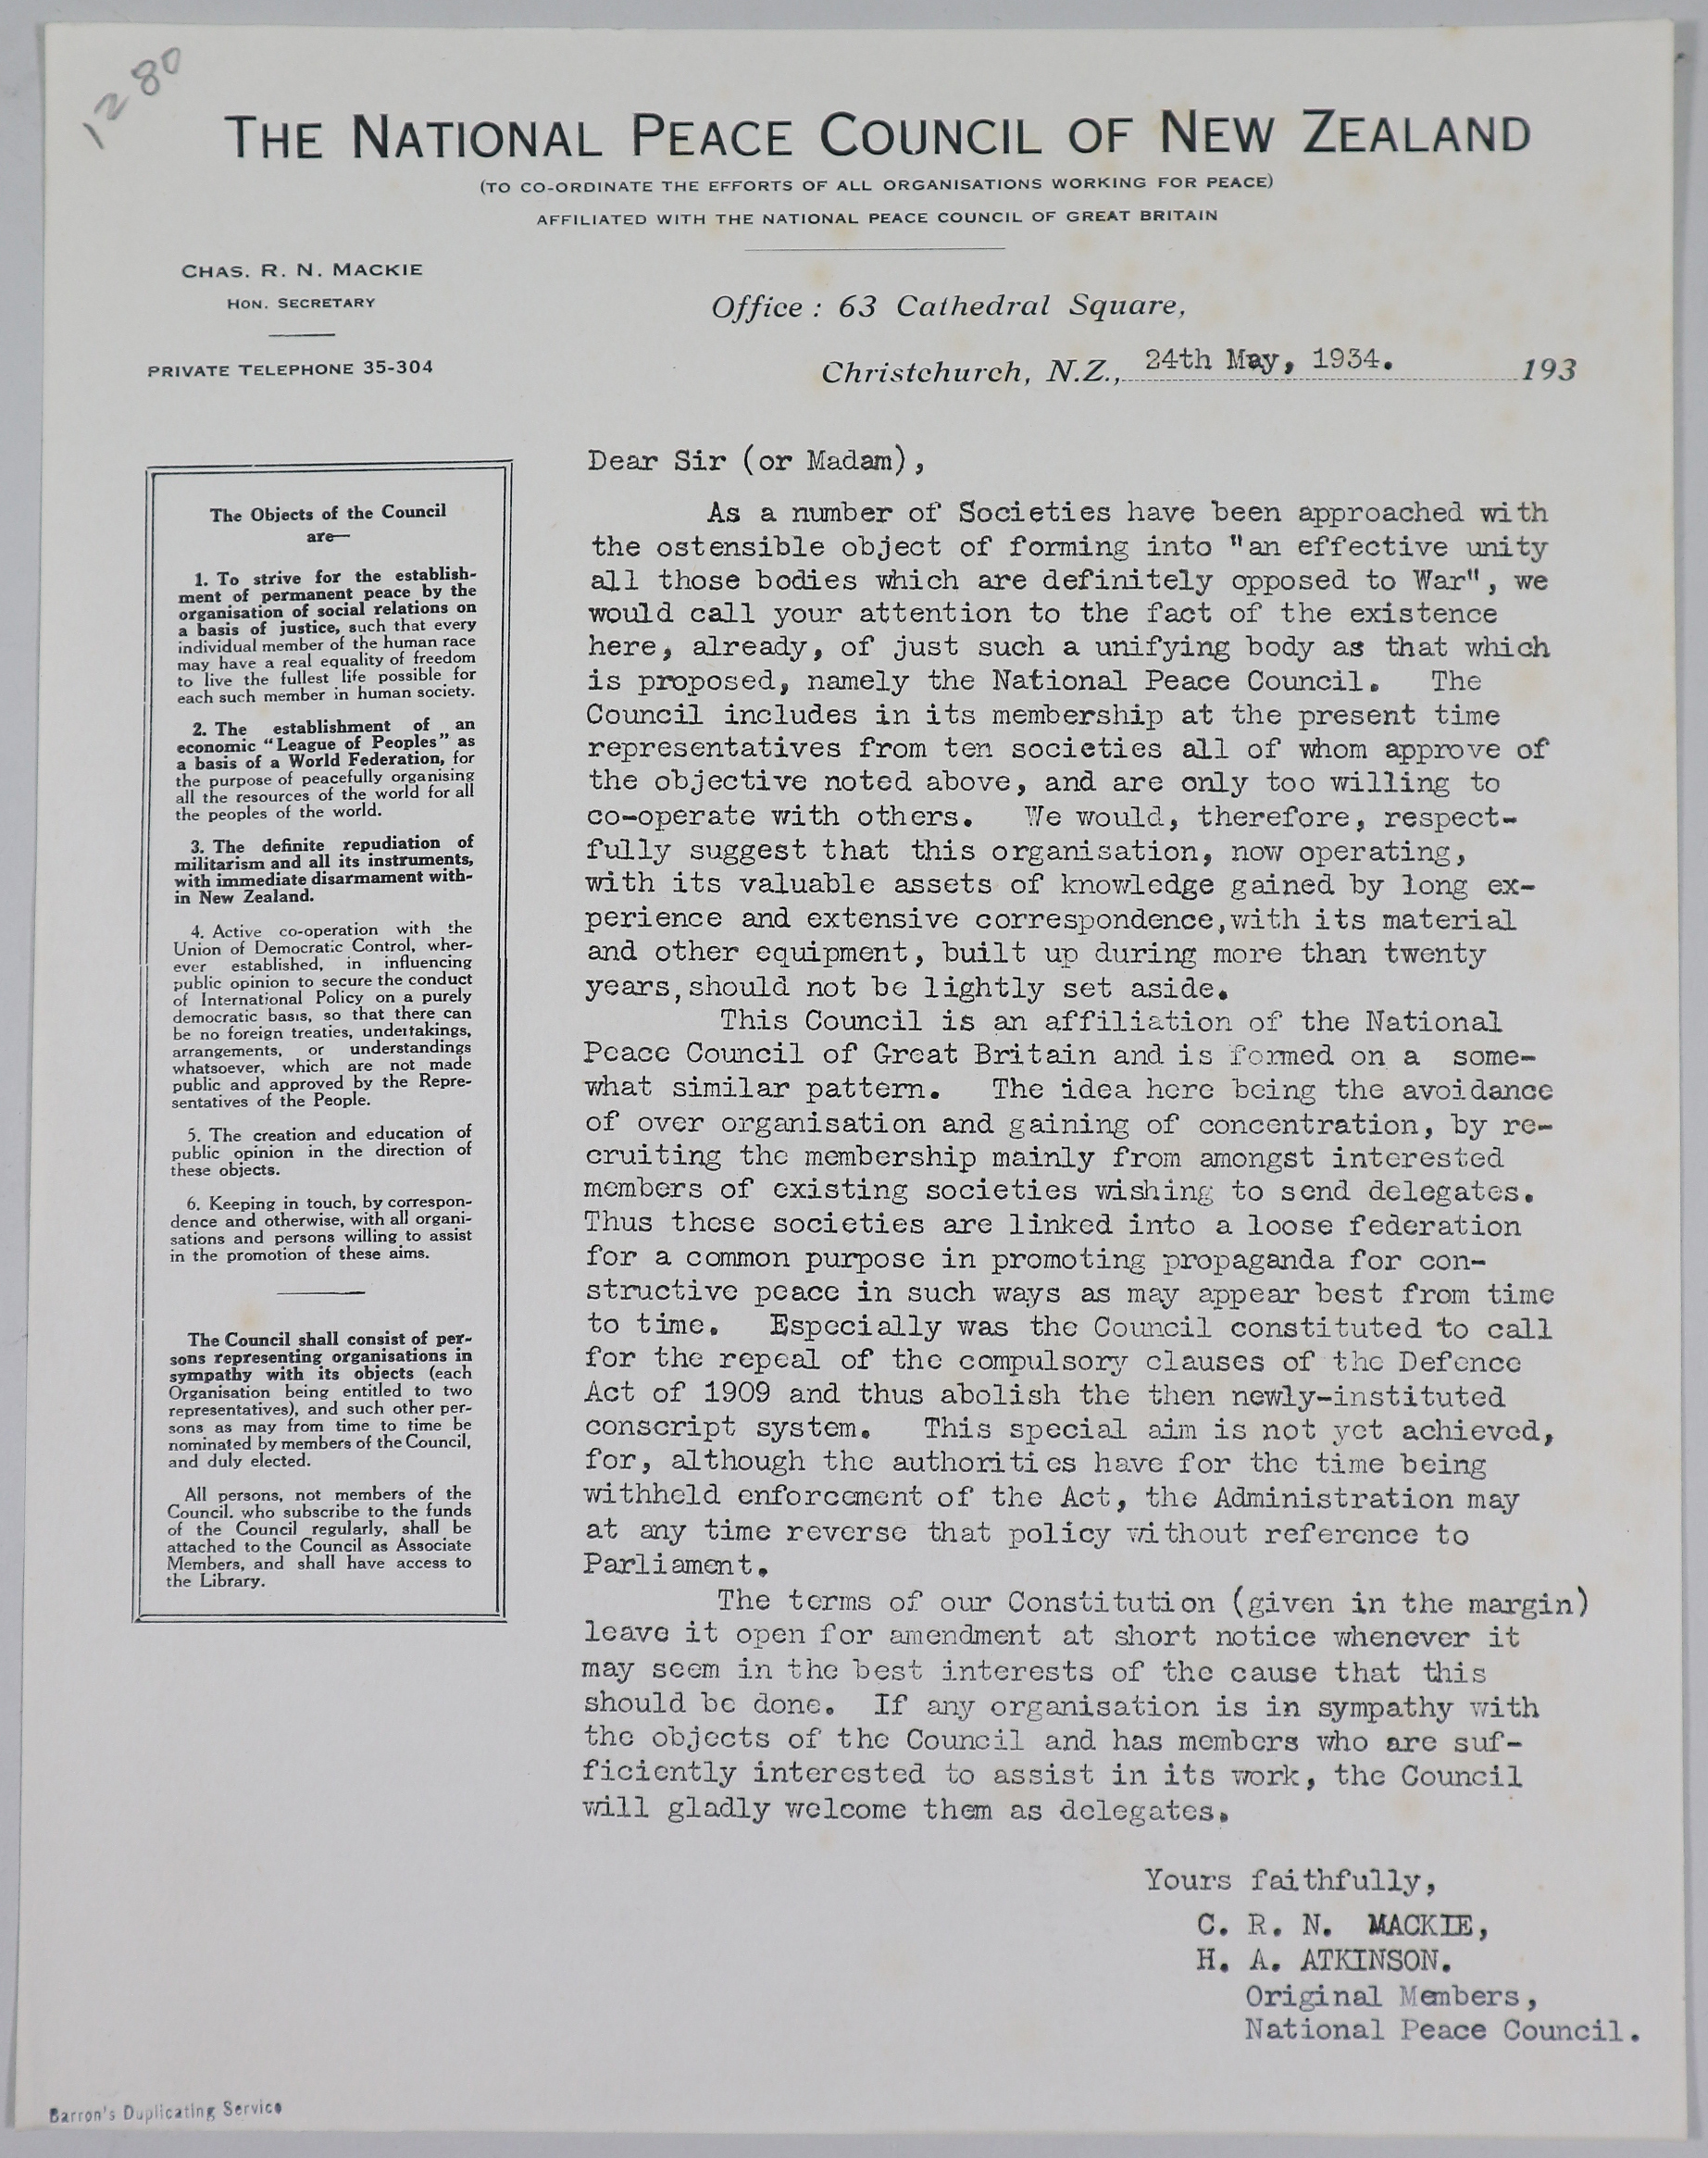 In this circular letter Charles Mackie and Harry Atkinson explain what the National Peace Council does. Mackie Papers Box 28 Folder 121 Series 1280.